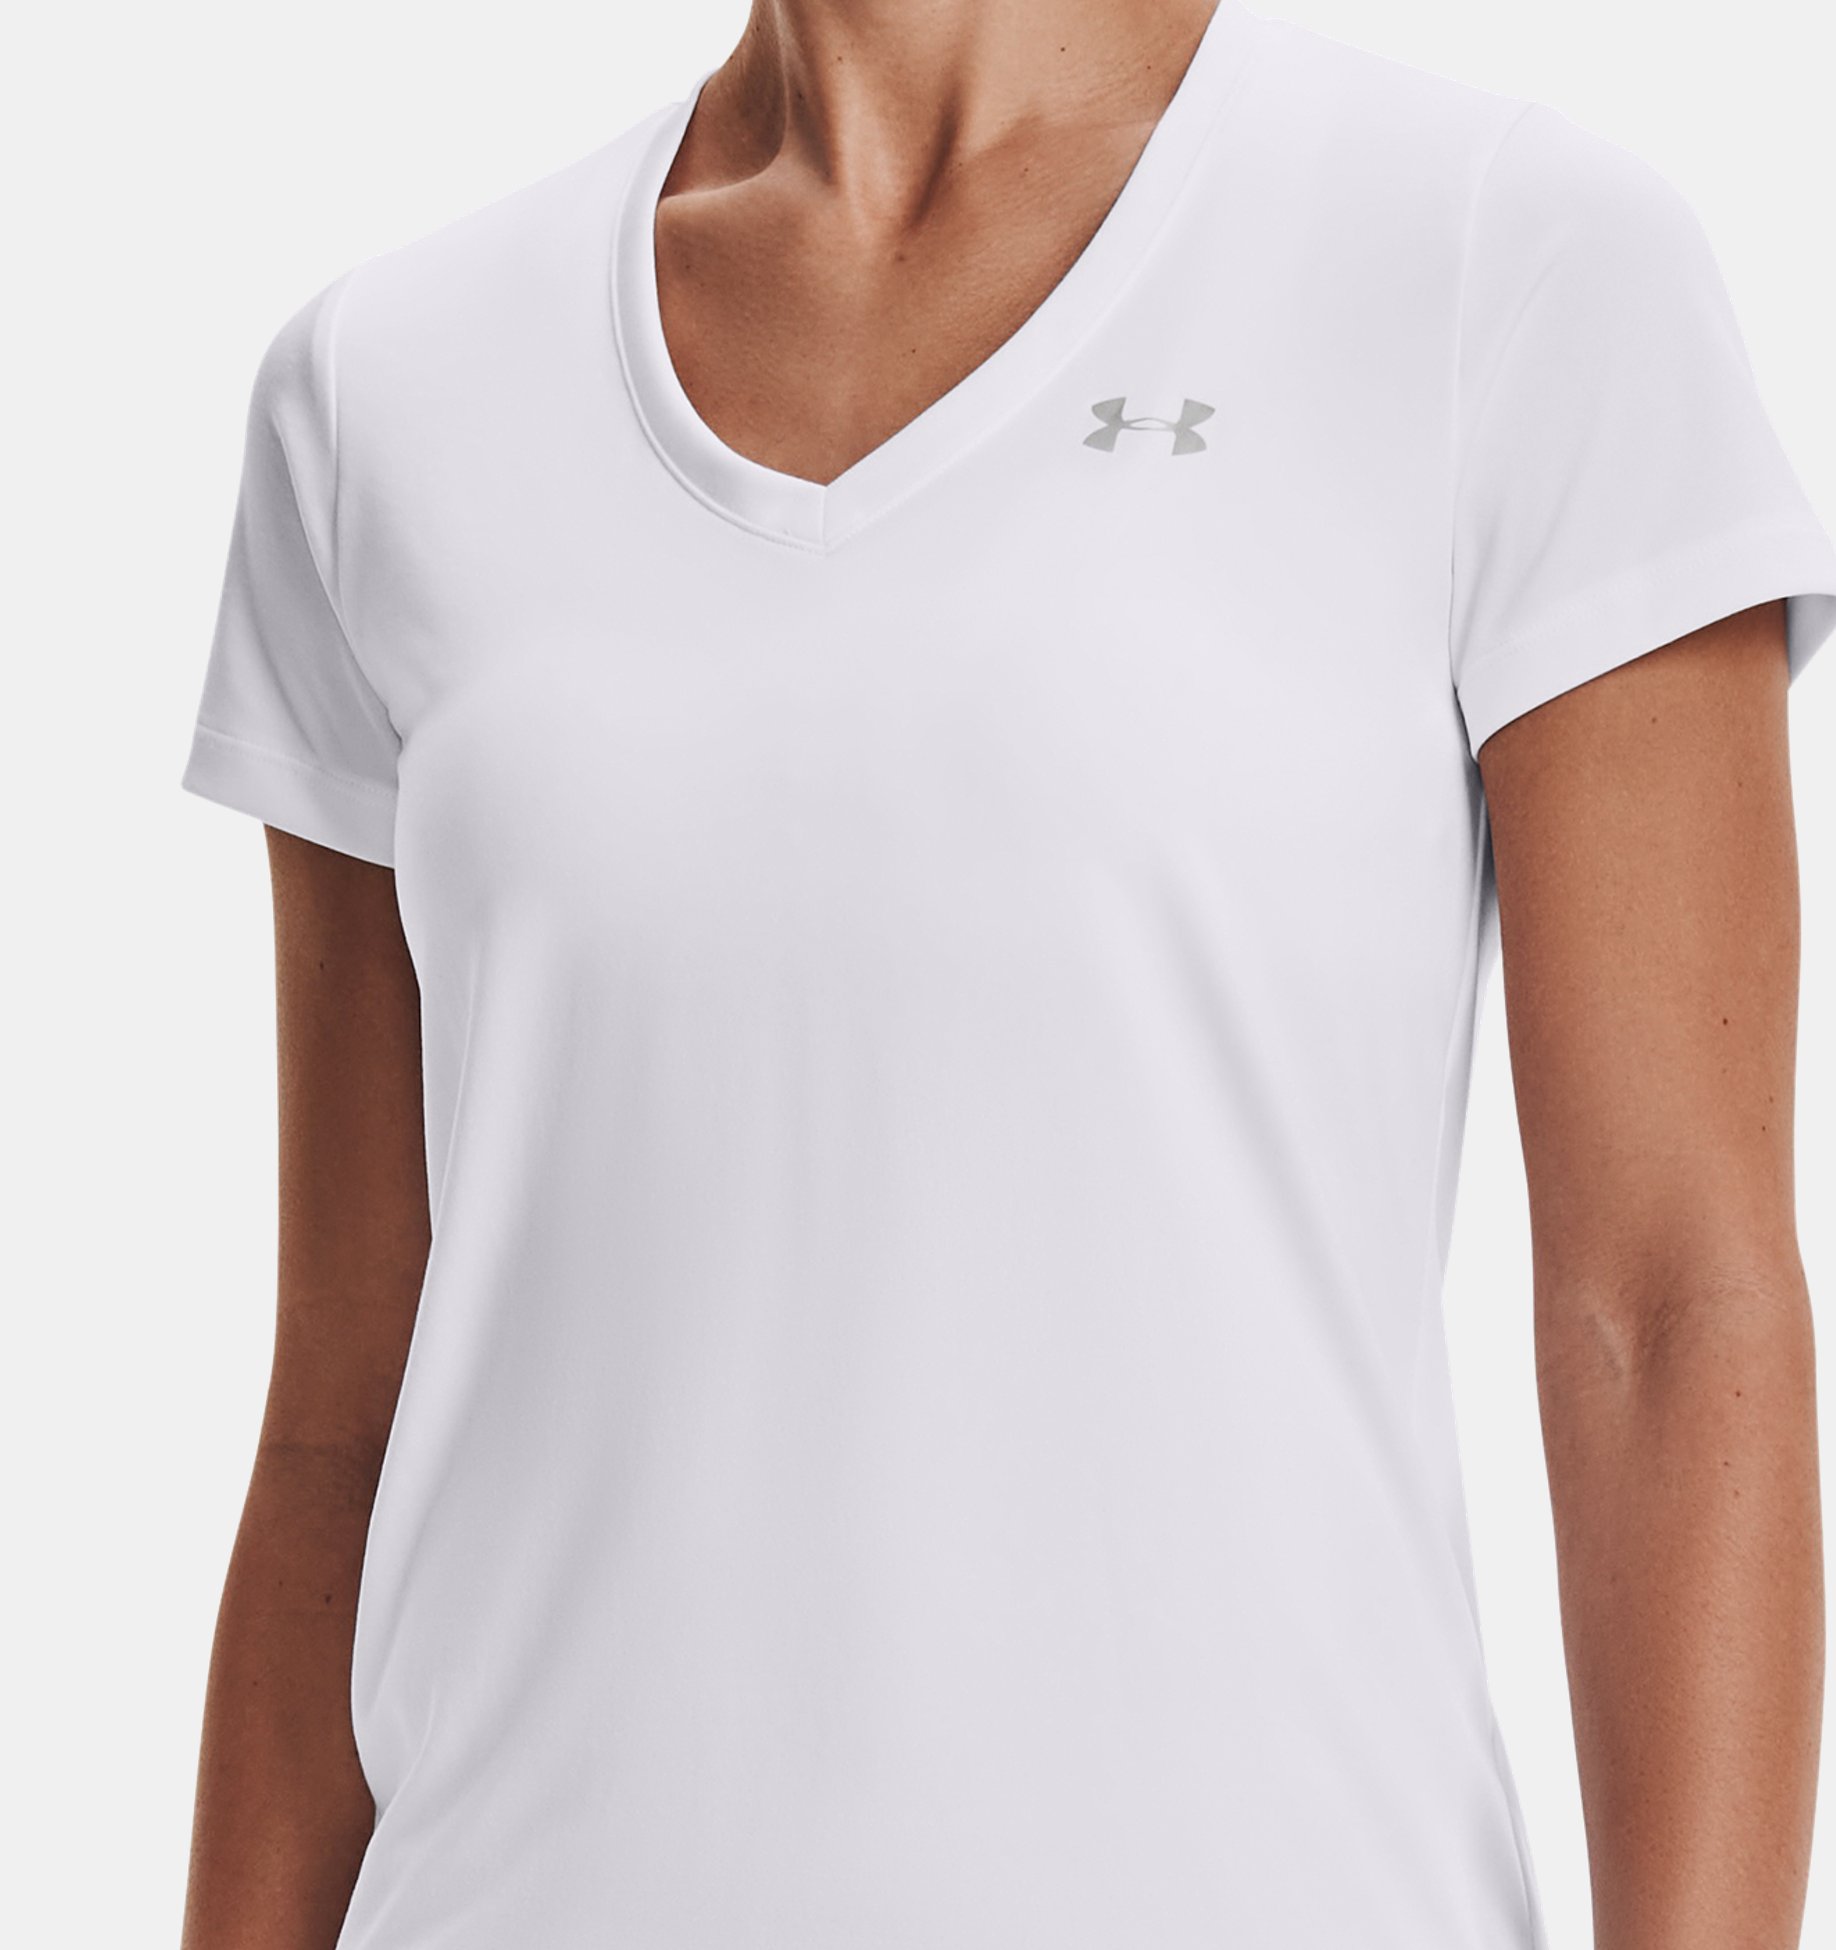 https://underarmour.scene7.com/is/image/Underarmour/V5-1255839-100_FC?rp=standard-0pad|pdpZoomDesktop&scl=0.72&fmt=jpg&qlt=85&resMode=sharp2&cache=on,on&bgc=f0f0f0&wid=1836&hei=1950&size=1500,1500